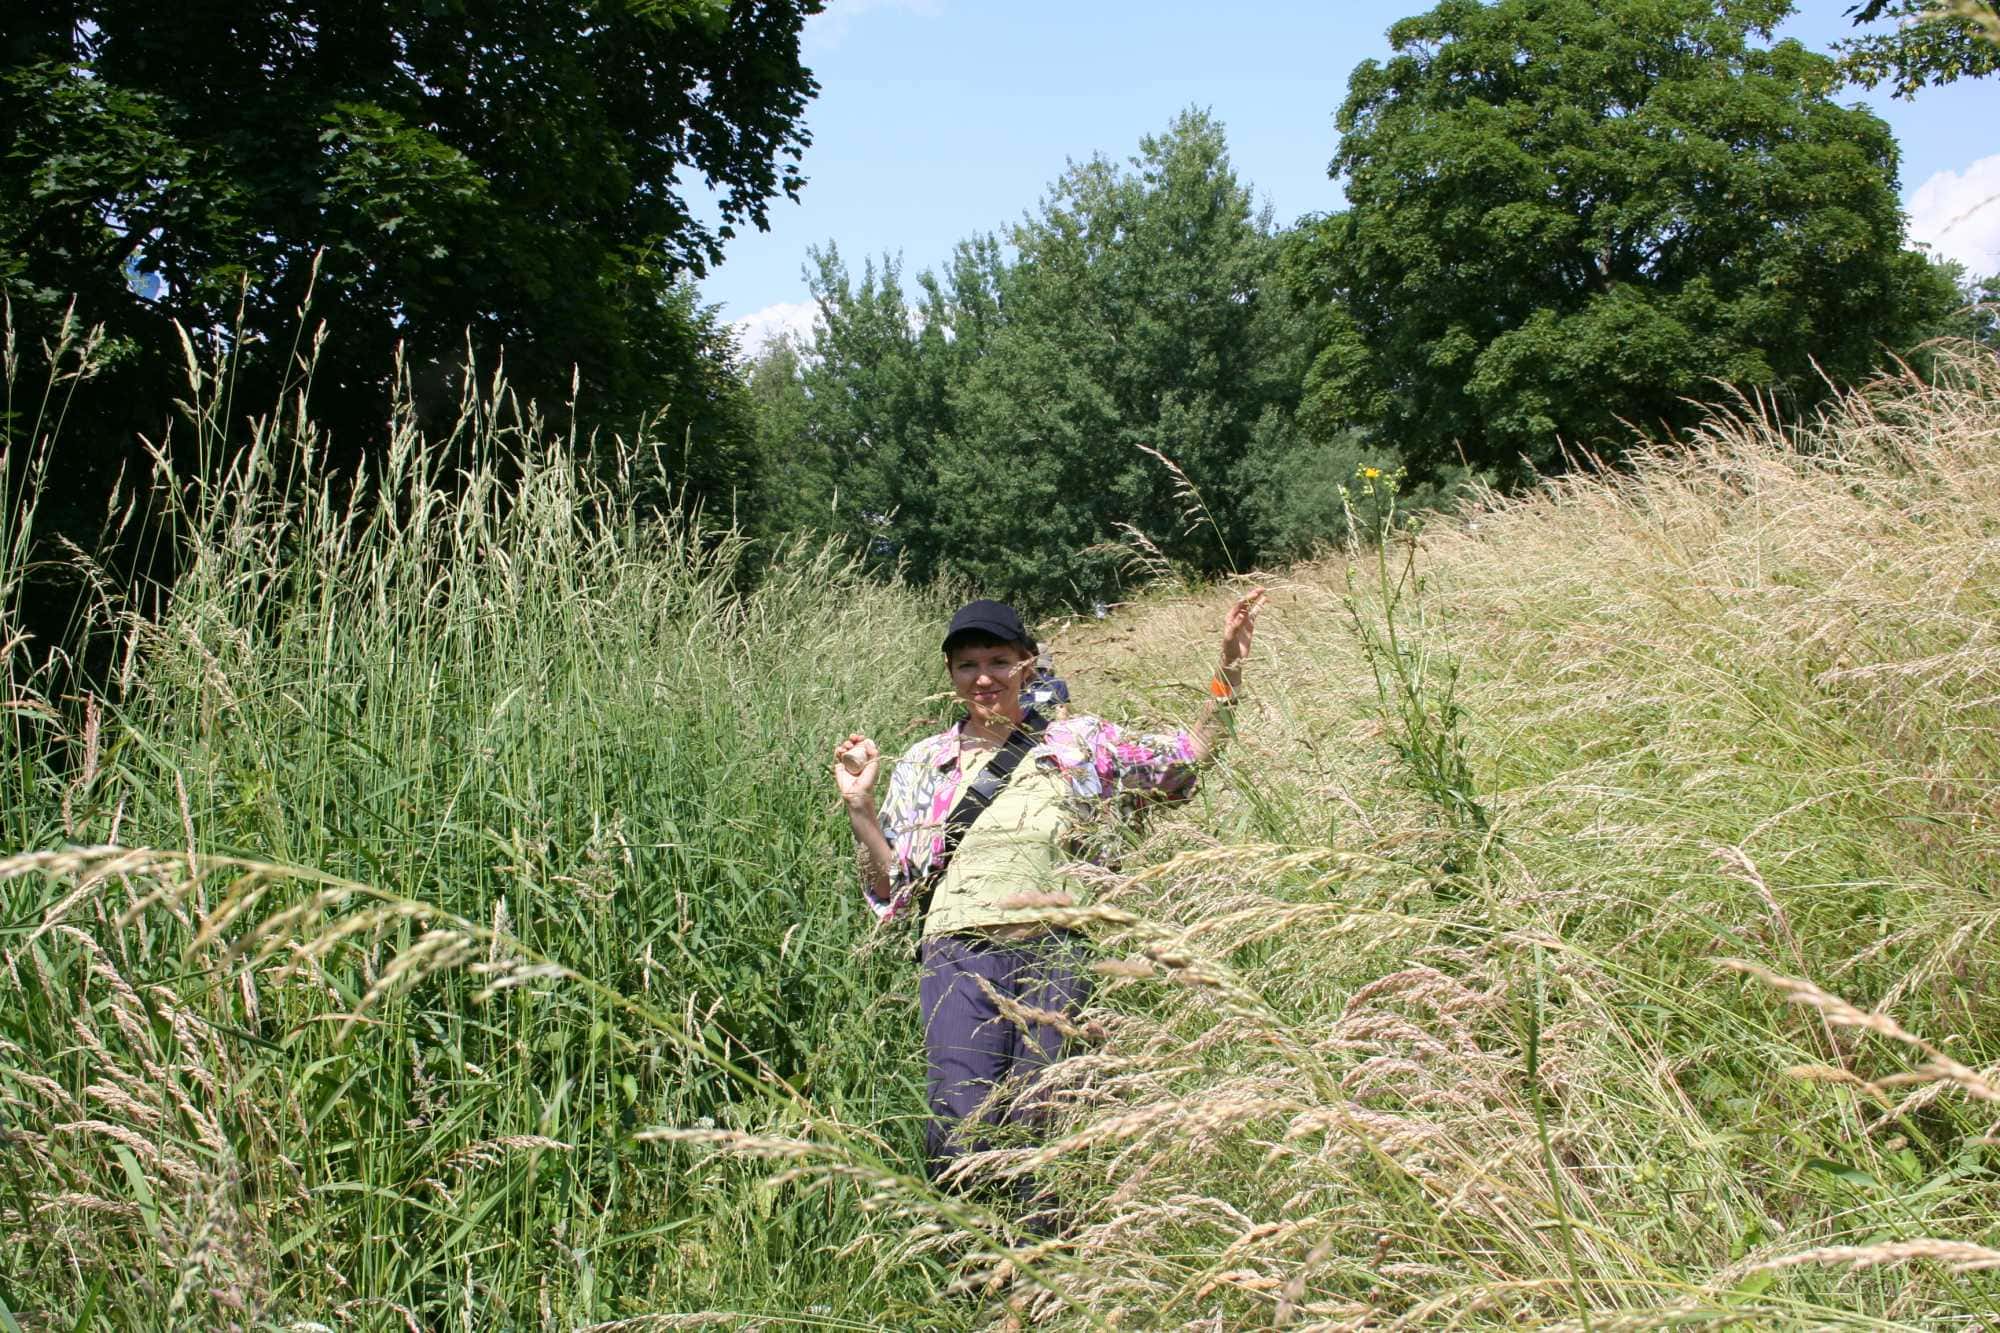 a woman in high grass. tress in the background